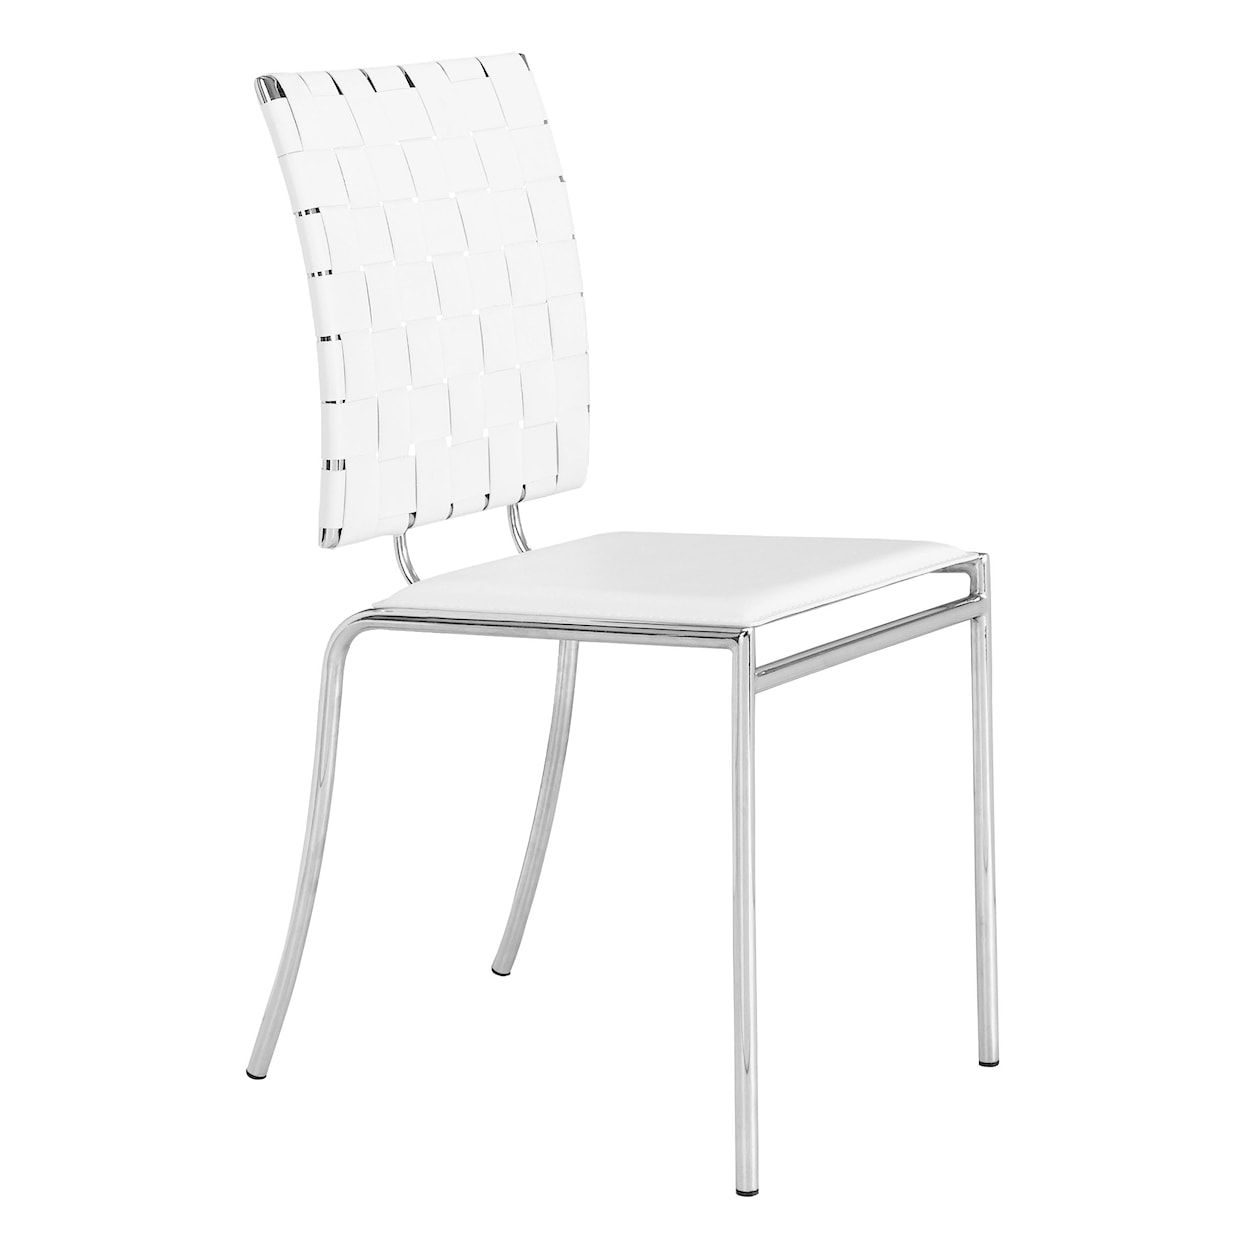 Zuo Modern Dining Accents Dining Chair Set